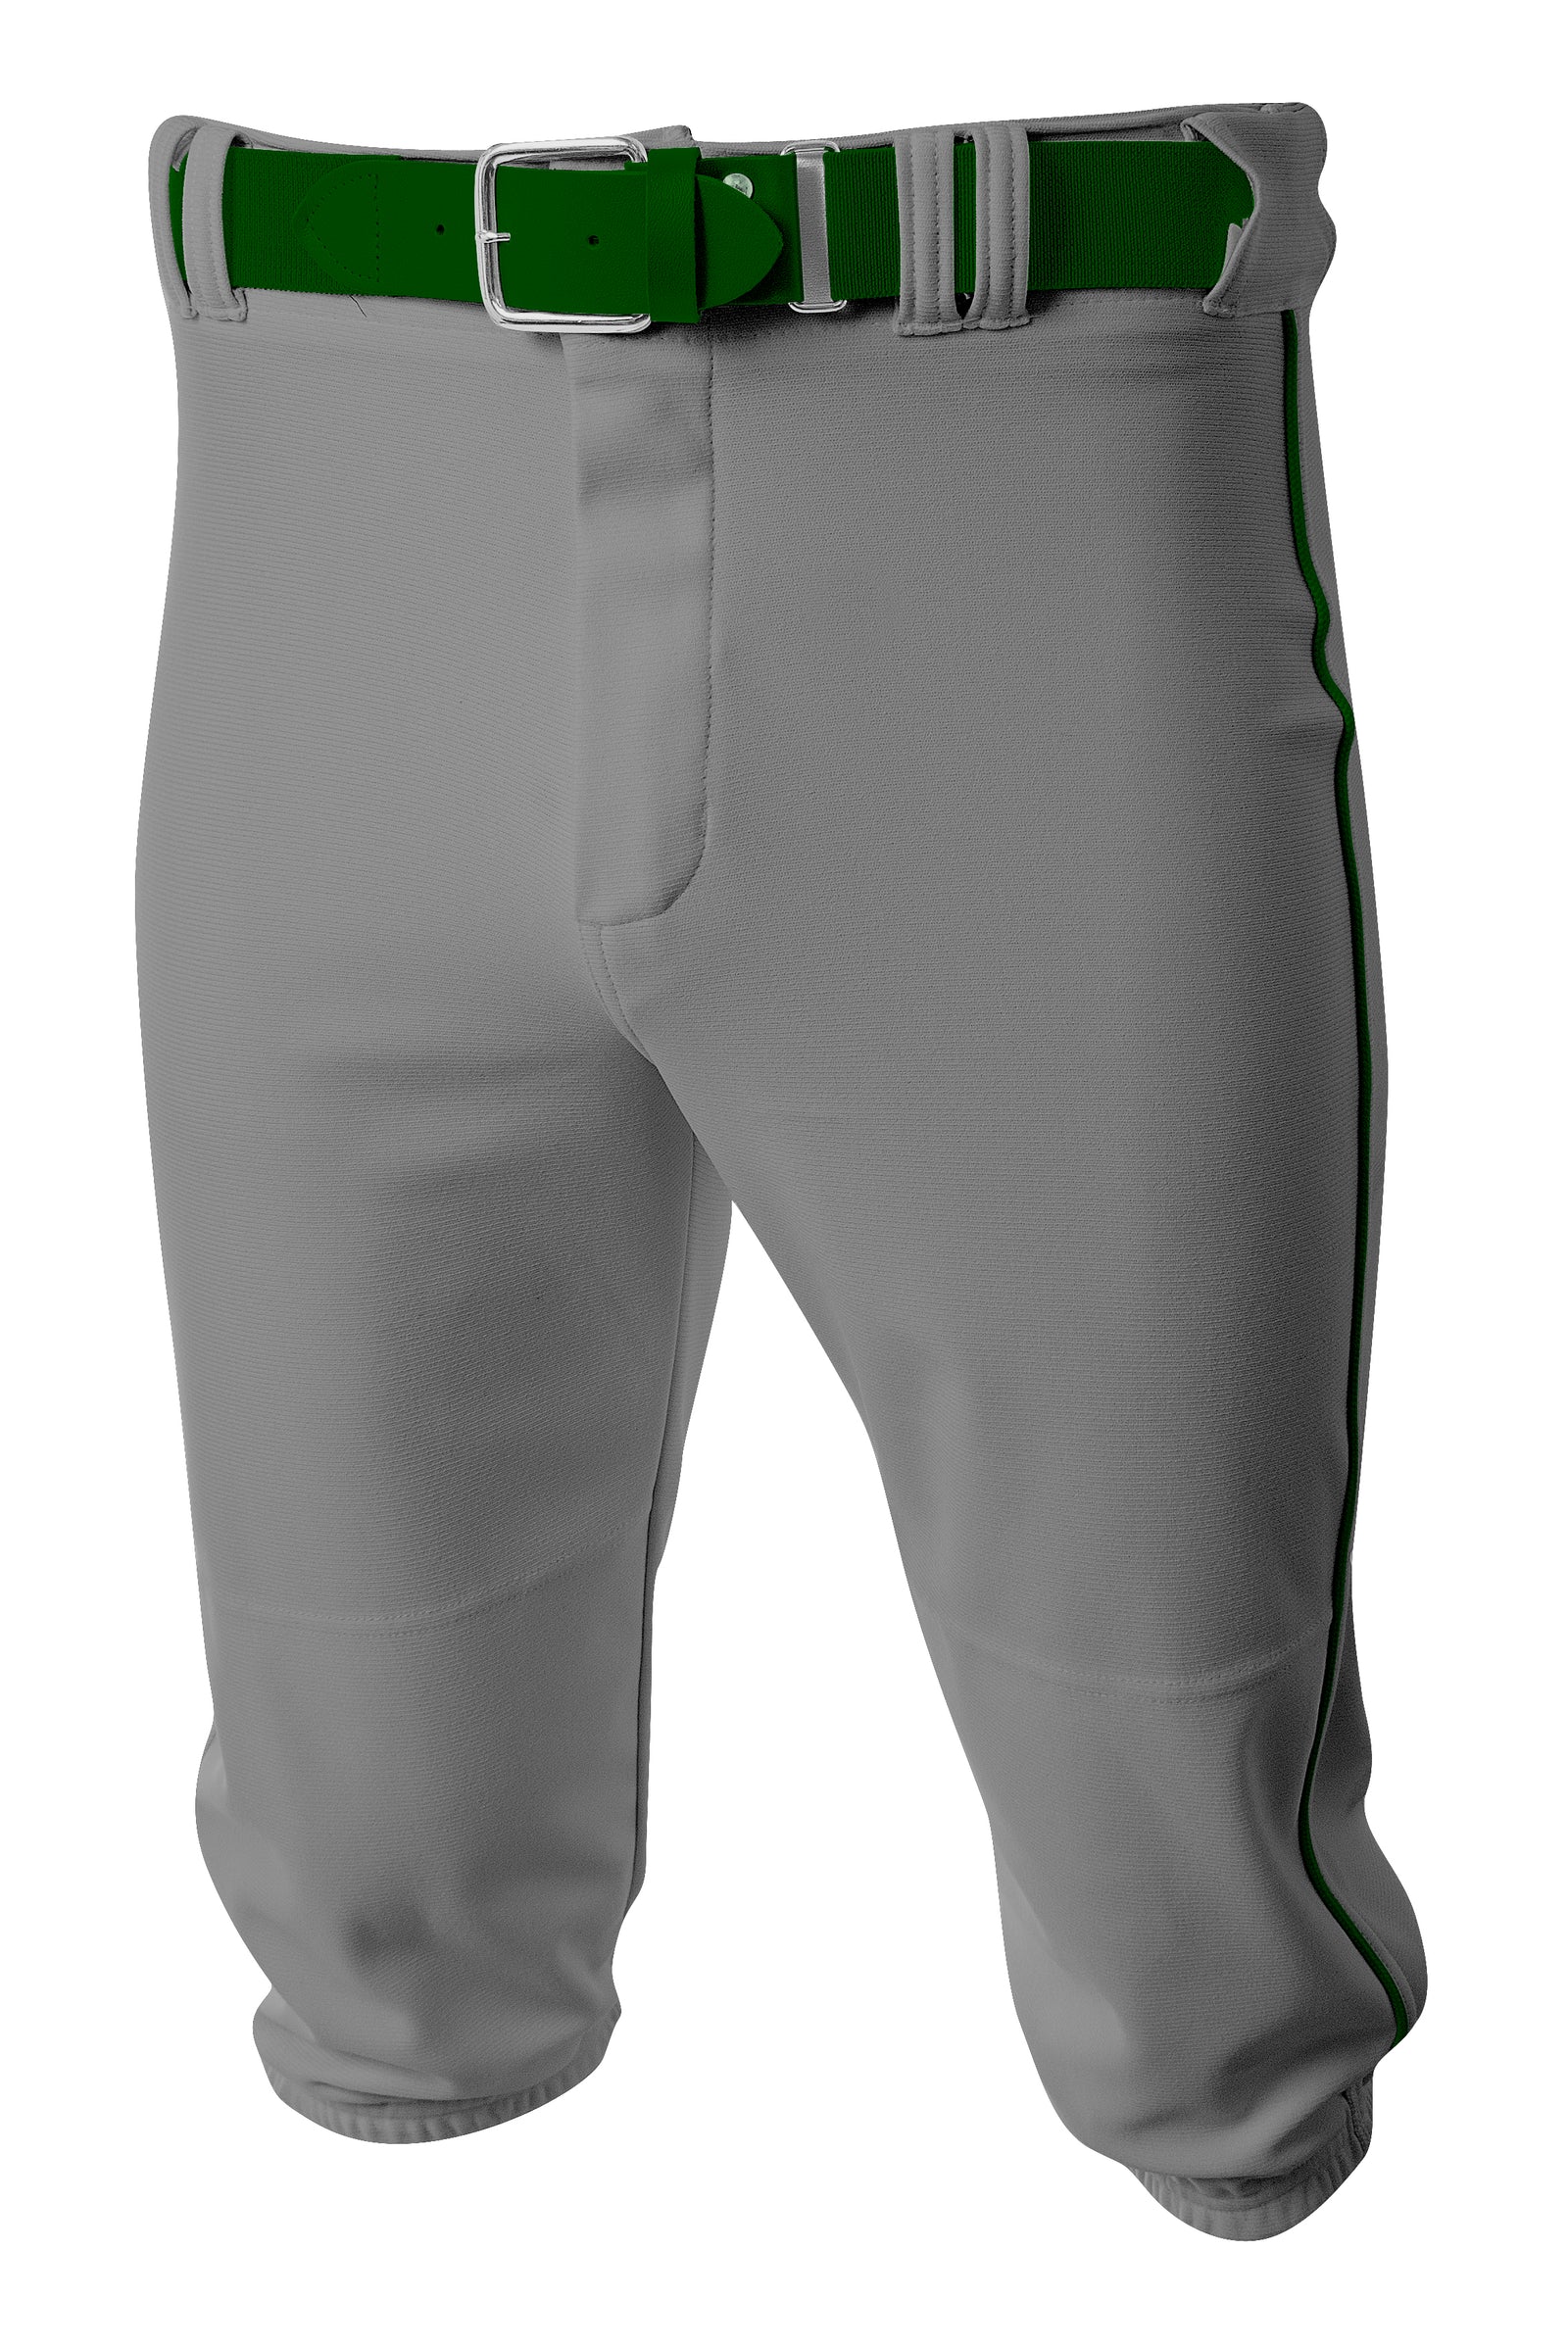 Grey/forest A4 A4 Baseball Knicker Pant